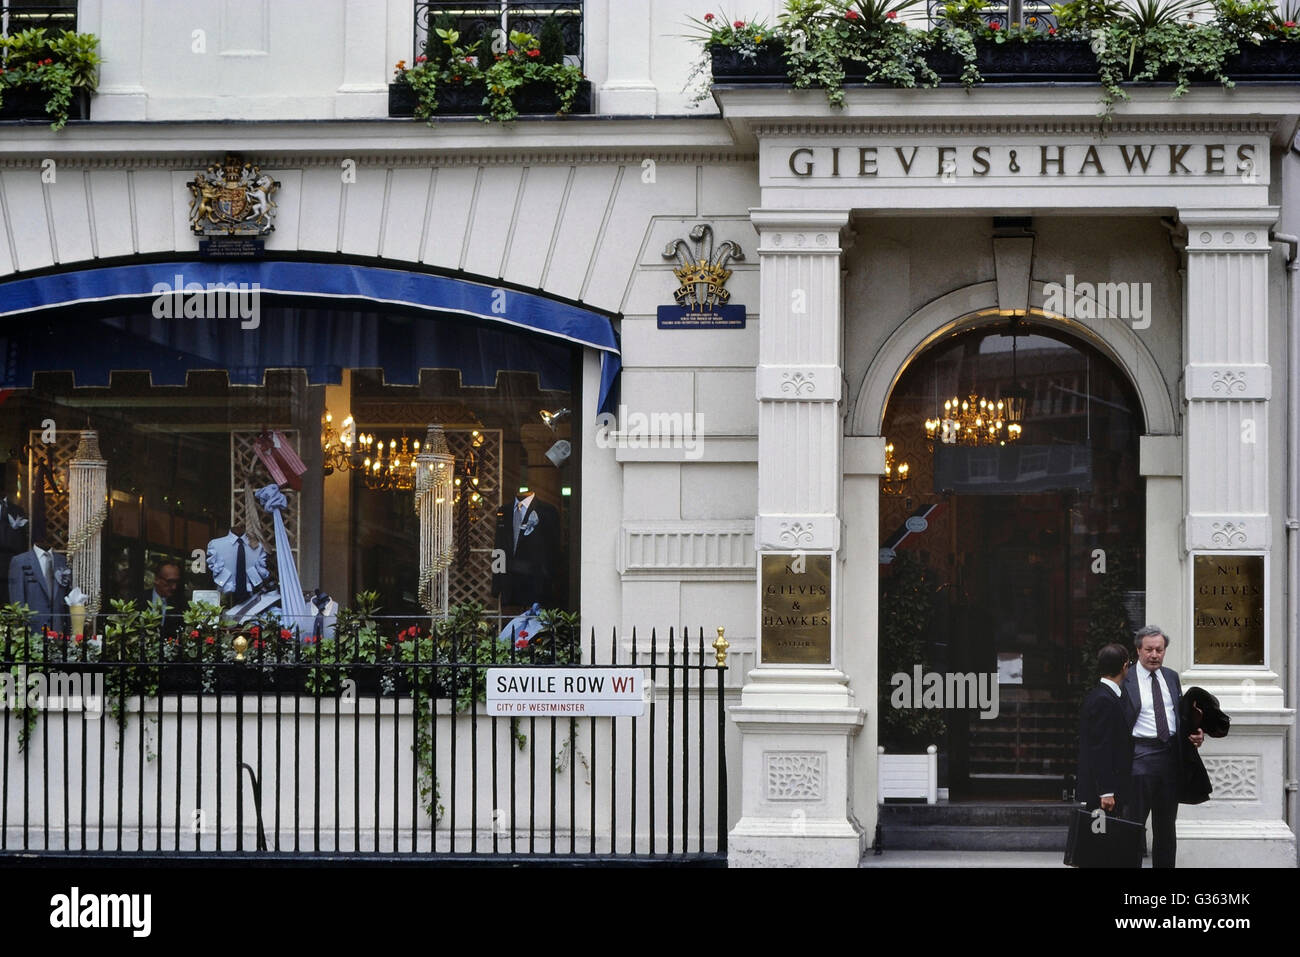 Gieves & Hawkes tailleurs. Savile Row. Londres. L'Angleterre. UK. L'Europe Banque D'Images